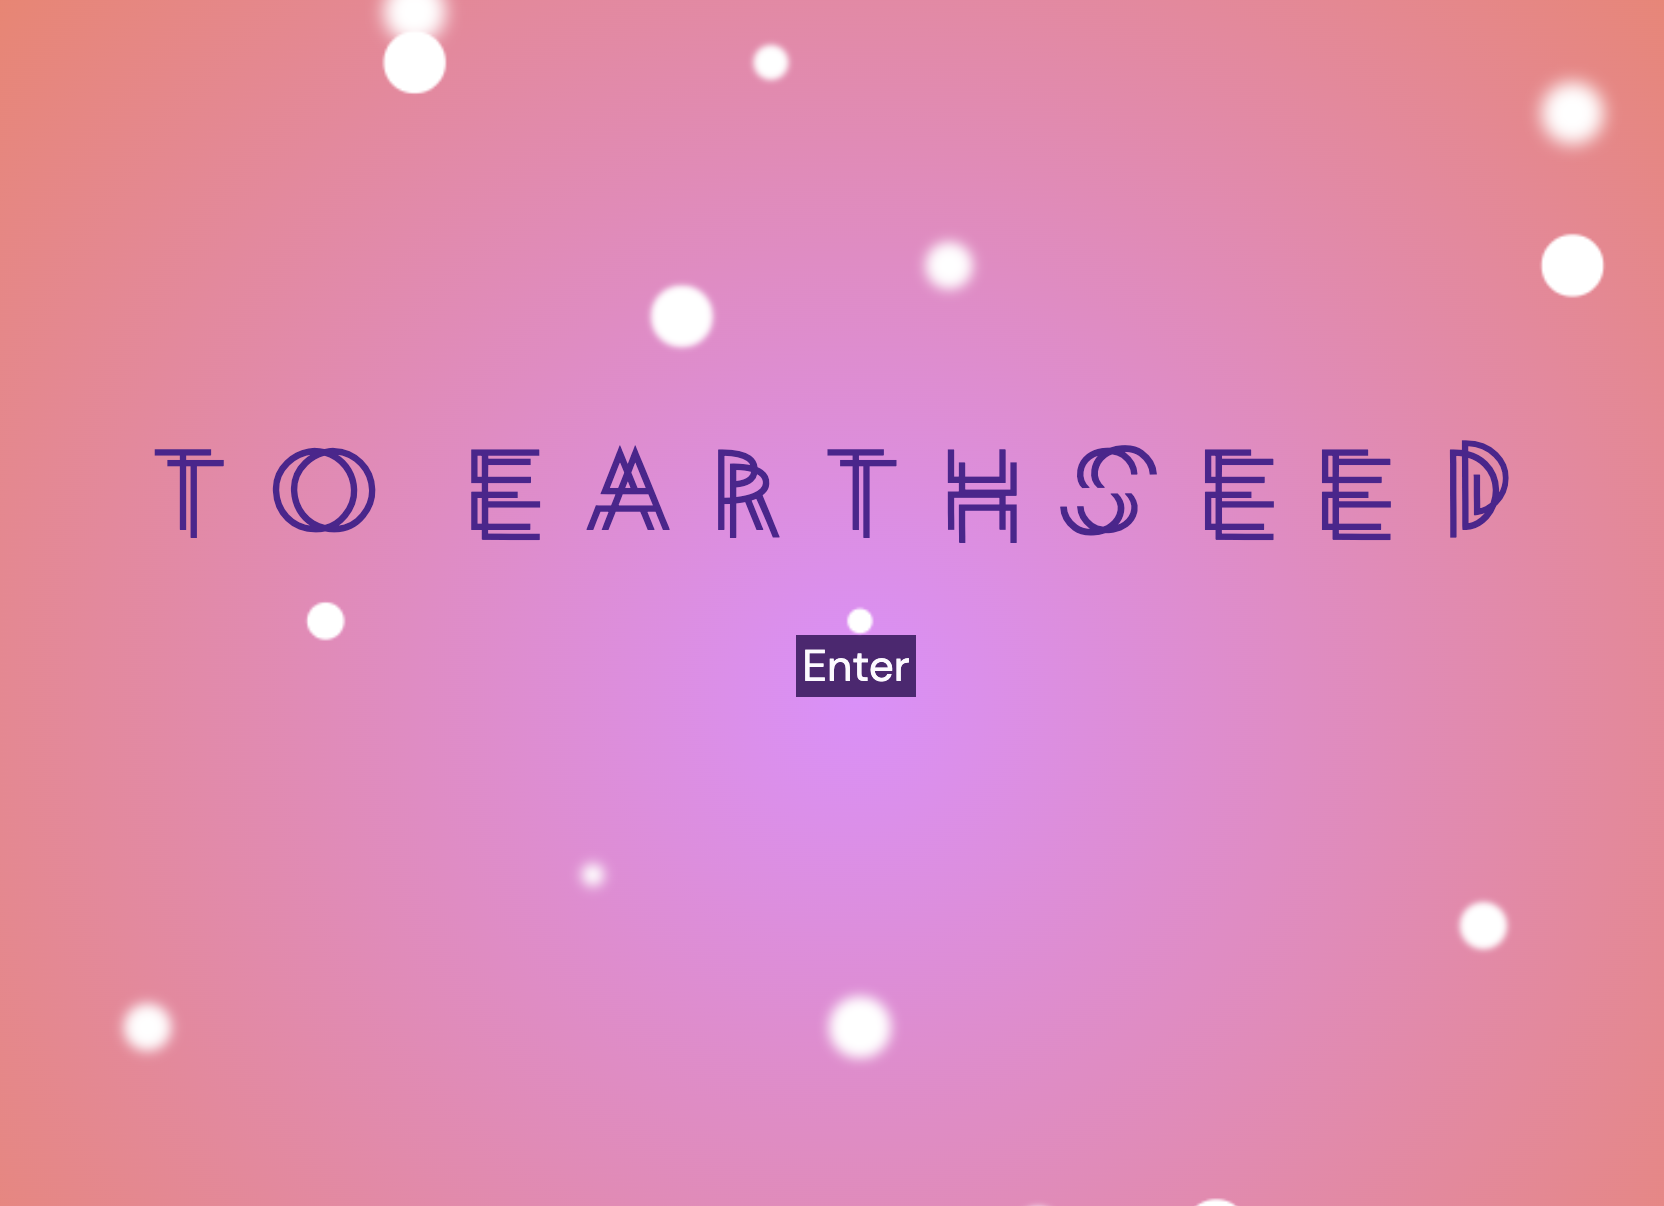 a pink background spotted with white dots, purple text in the middle reads "To Earthseed" with a black "enter" box below